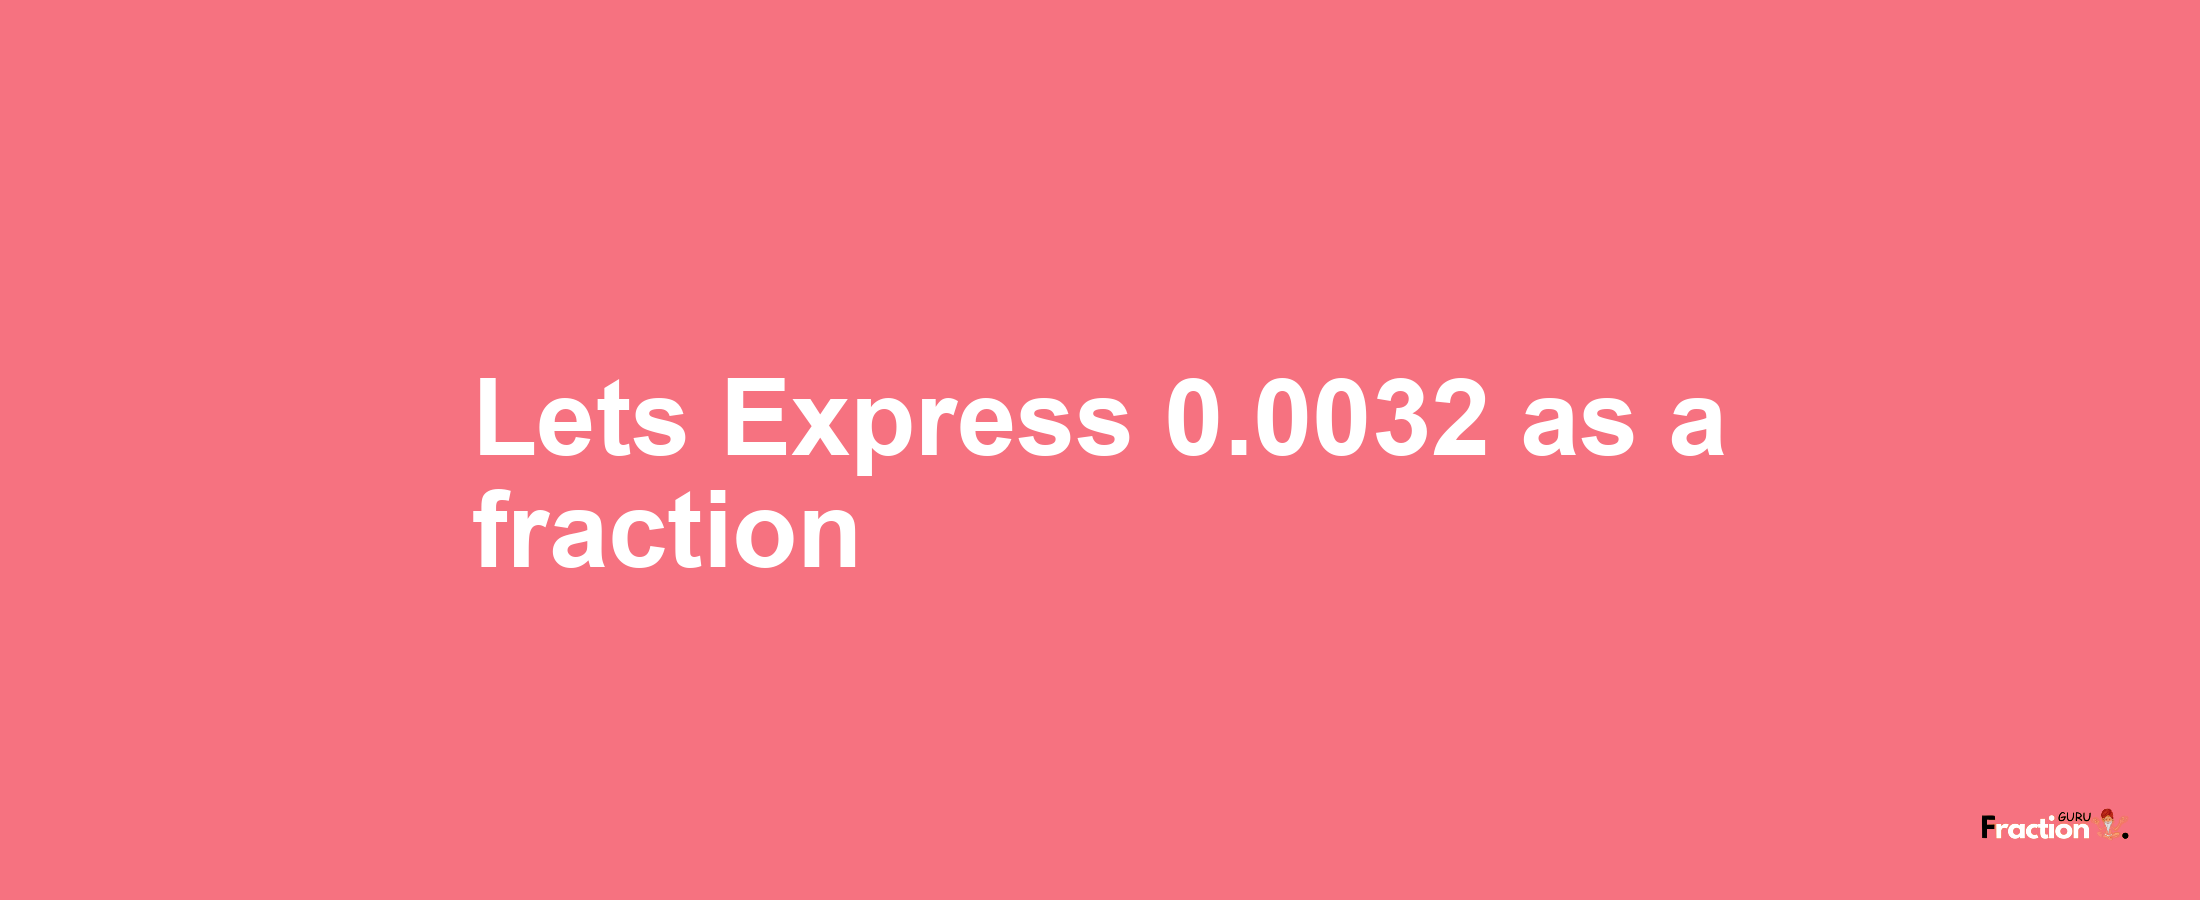 Lets Express 0.0032 as afraction